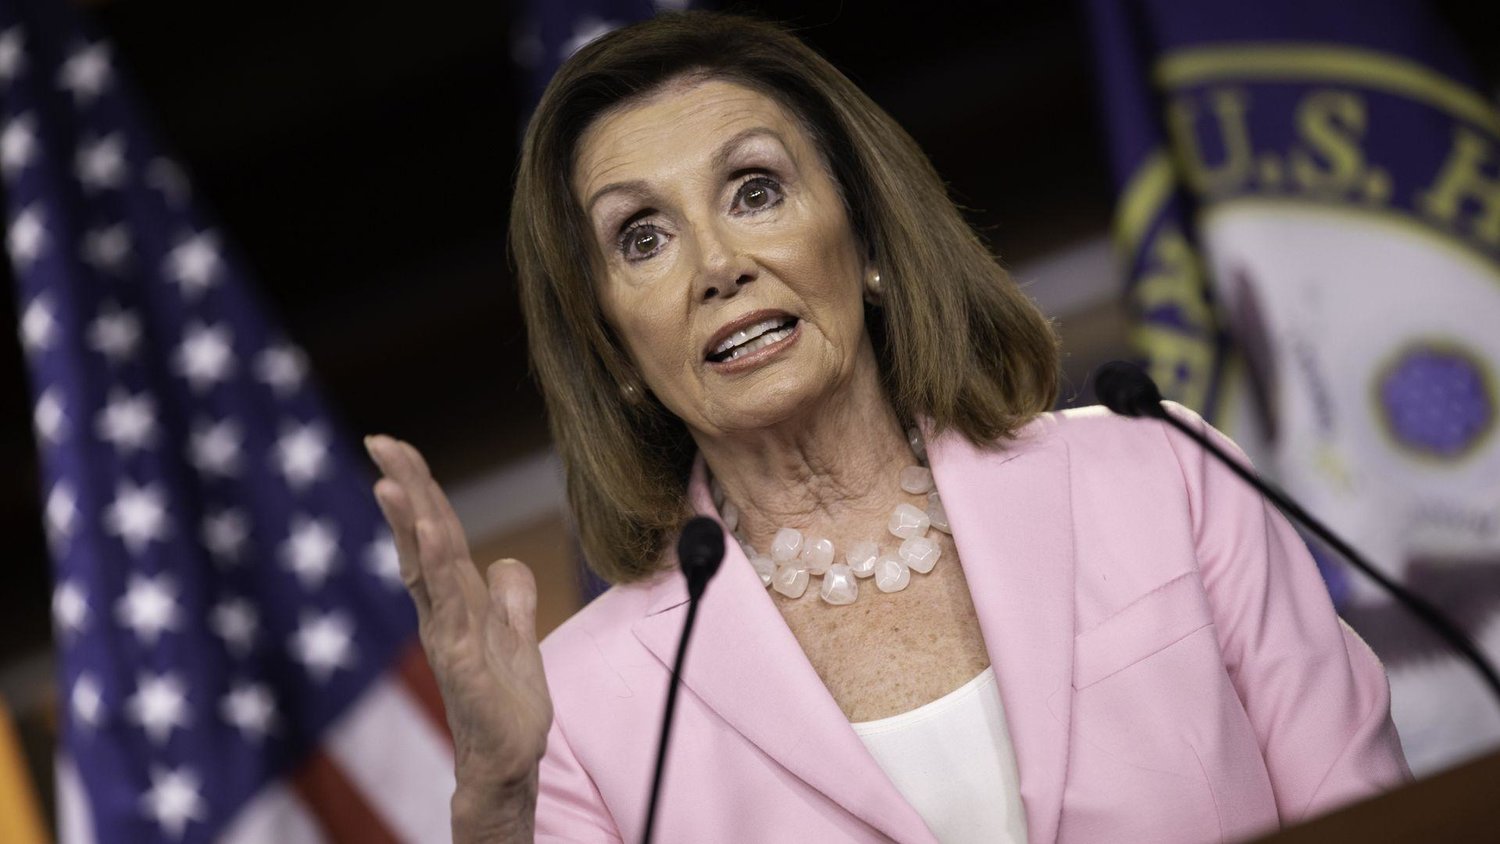 What Mrs. Pelosi aims to do is a conservatives’ nightmare